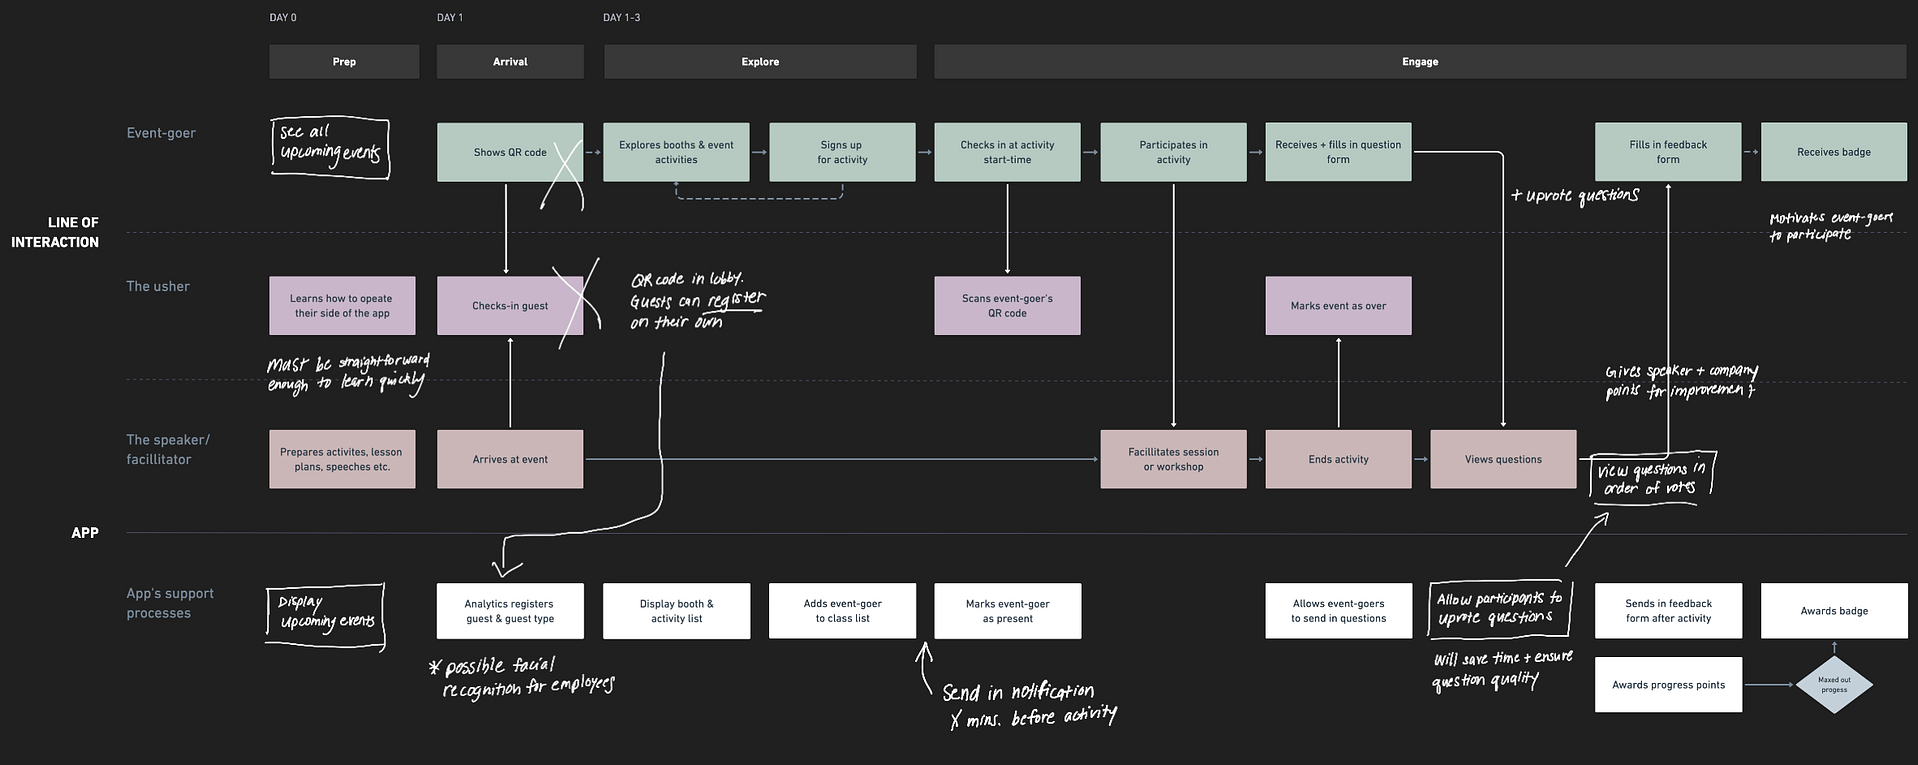 A high-level service blueprint for the event app